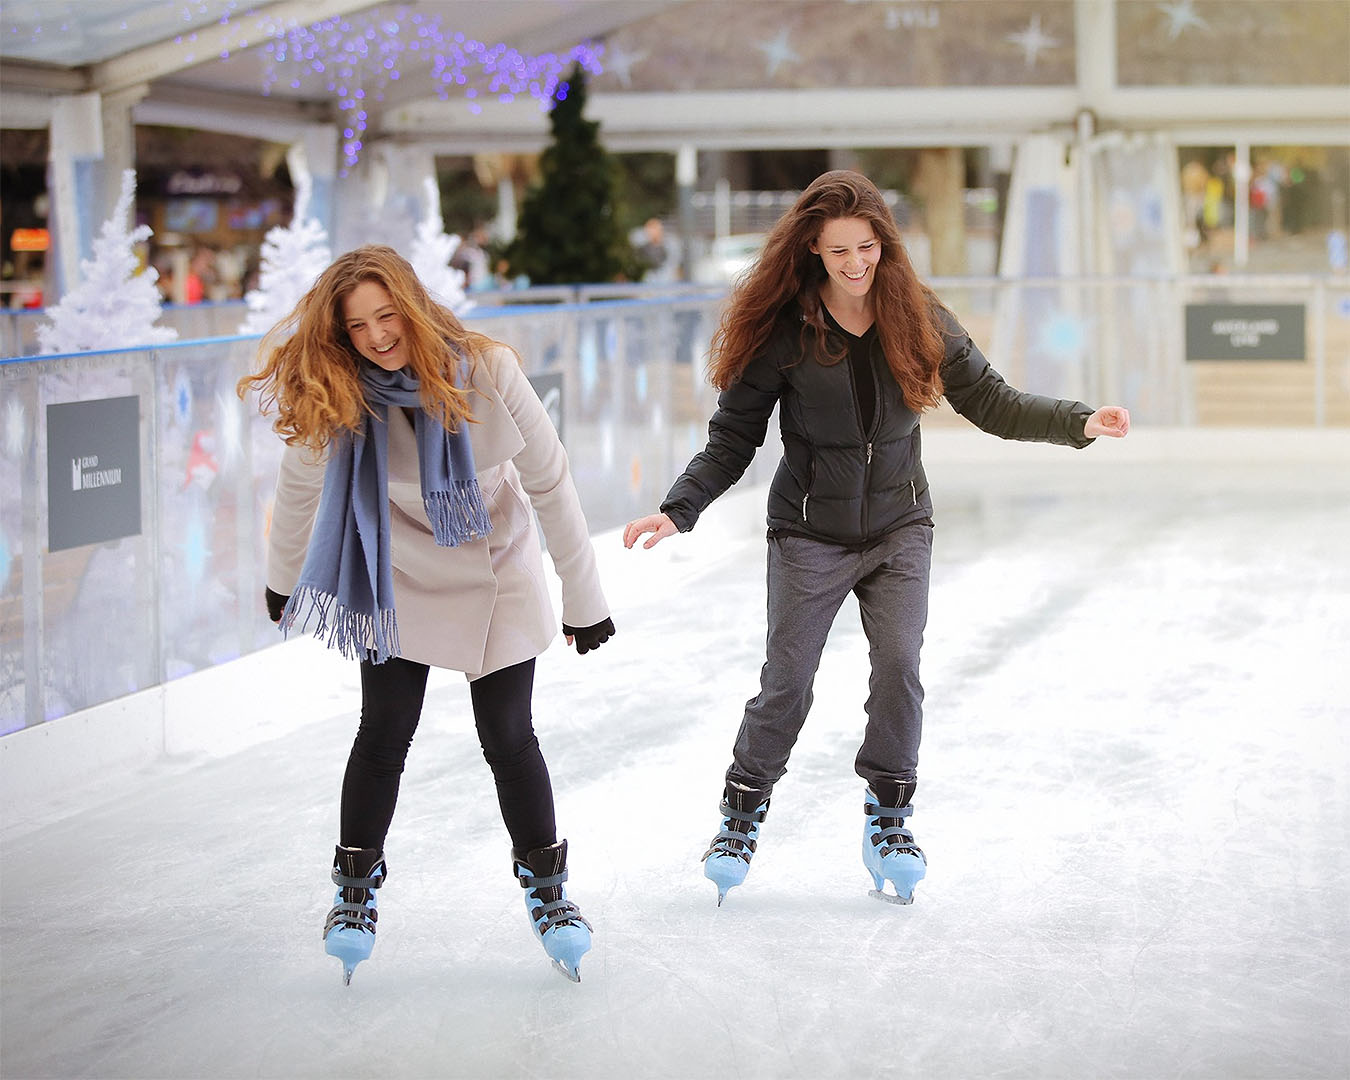 Two people having fun ice skating at Aotea Square in Auckland.